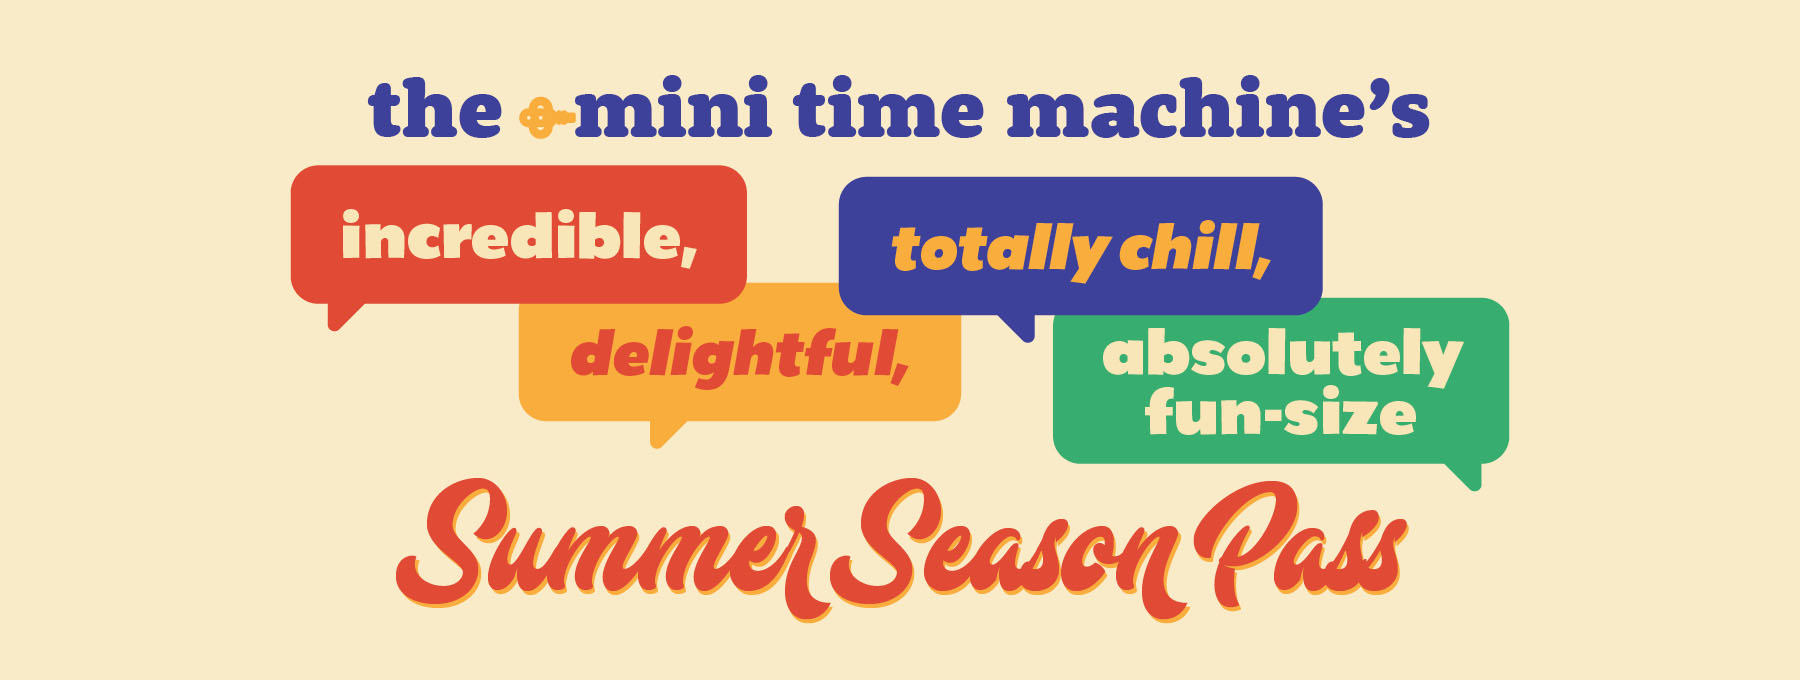 The Mini Time Machine's incredible, delightful, totally chill, absolutely fun-size Summer Season Pass